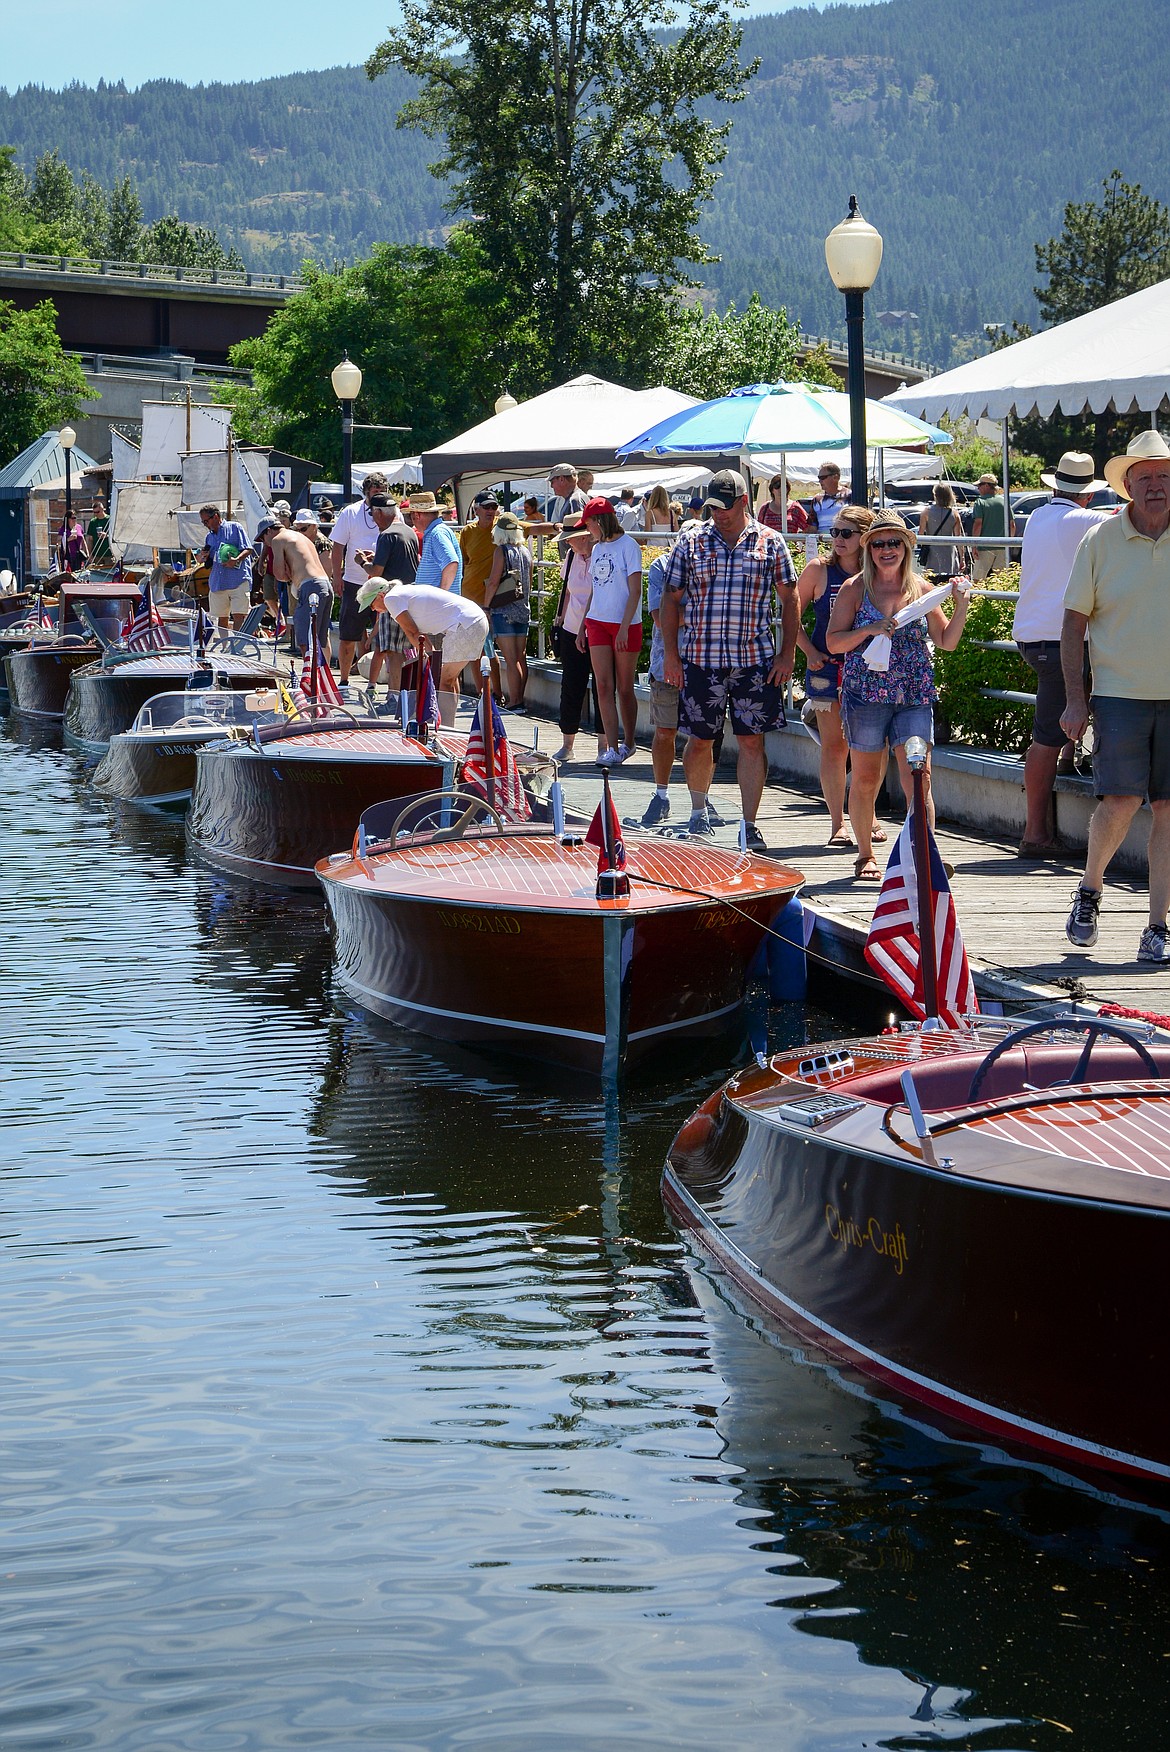 People walk along the Sandpoint Boardwalk as they enjoy the classic wooden boats at a past Sandpoint Boat Show.